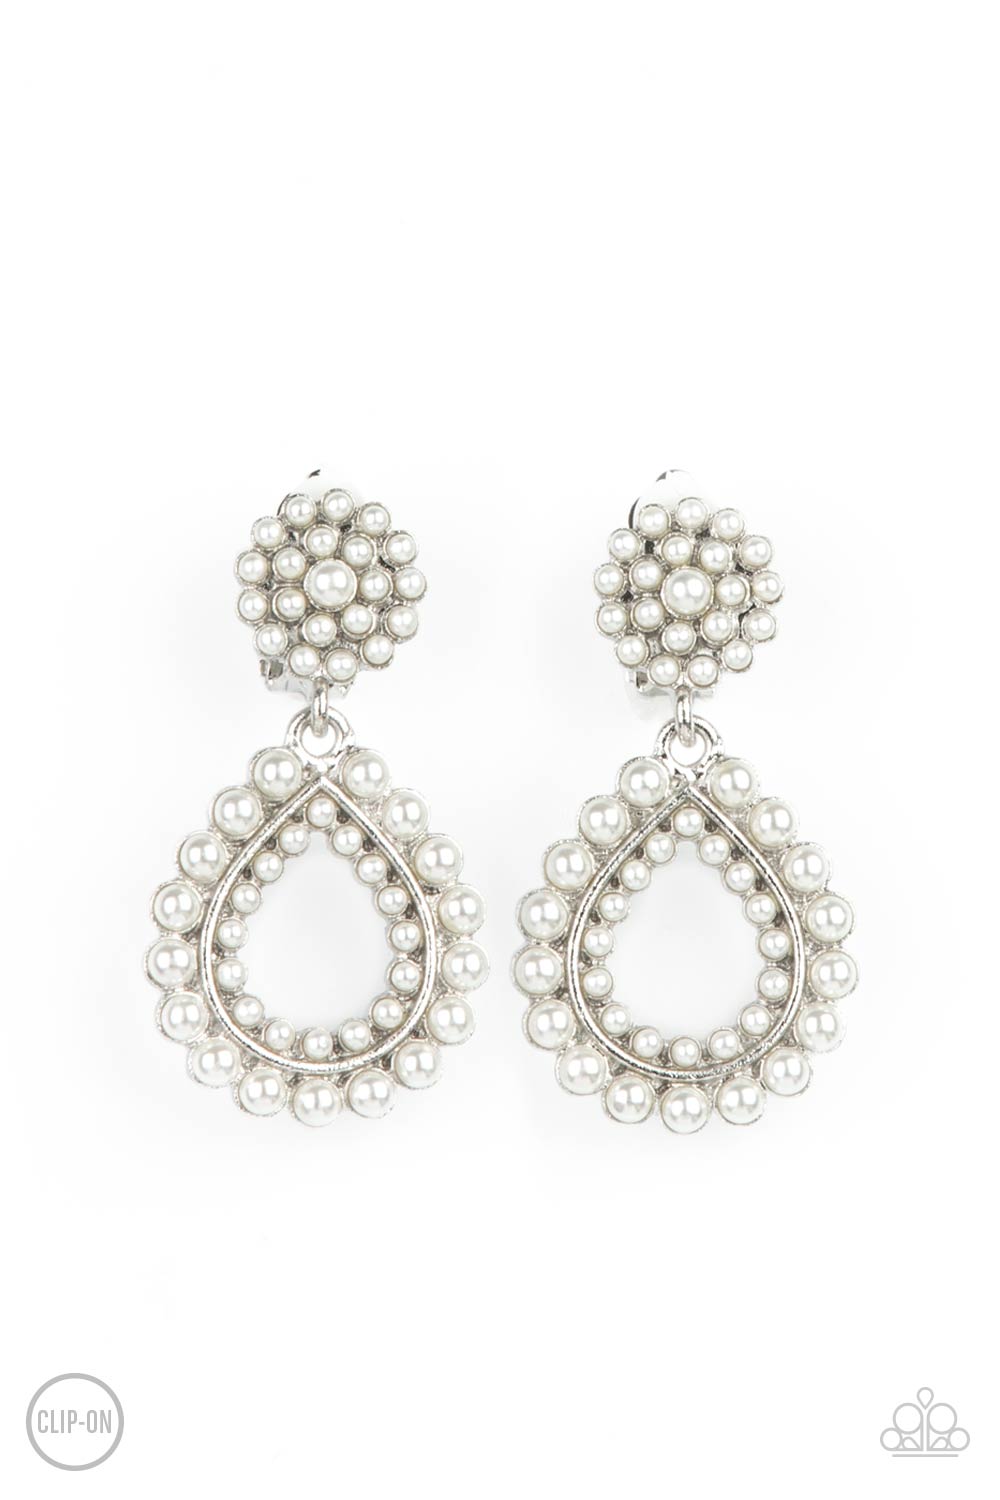 Clip-on Earrings - Discerning Droplets - White